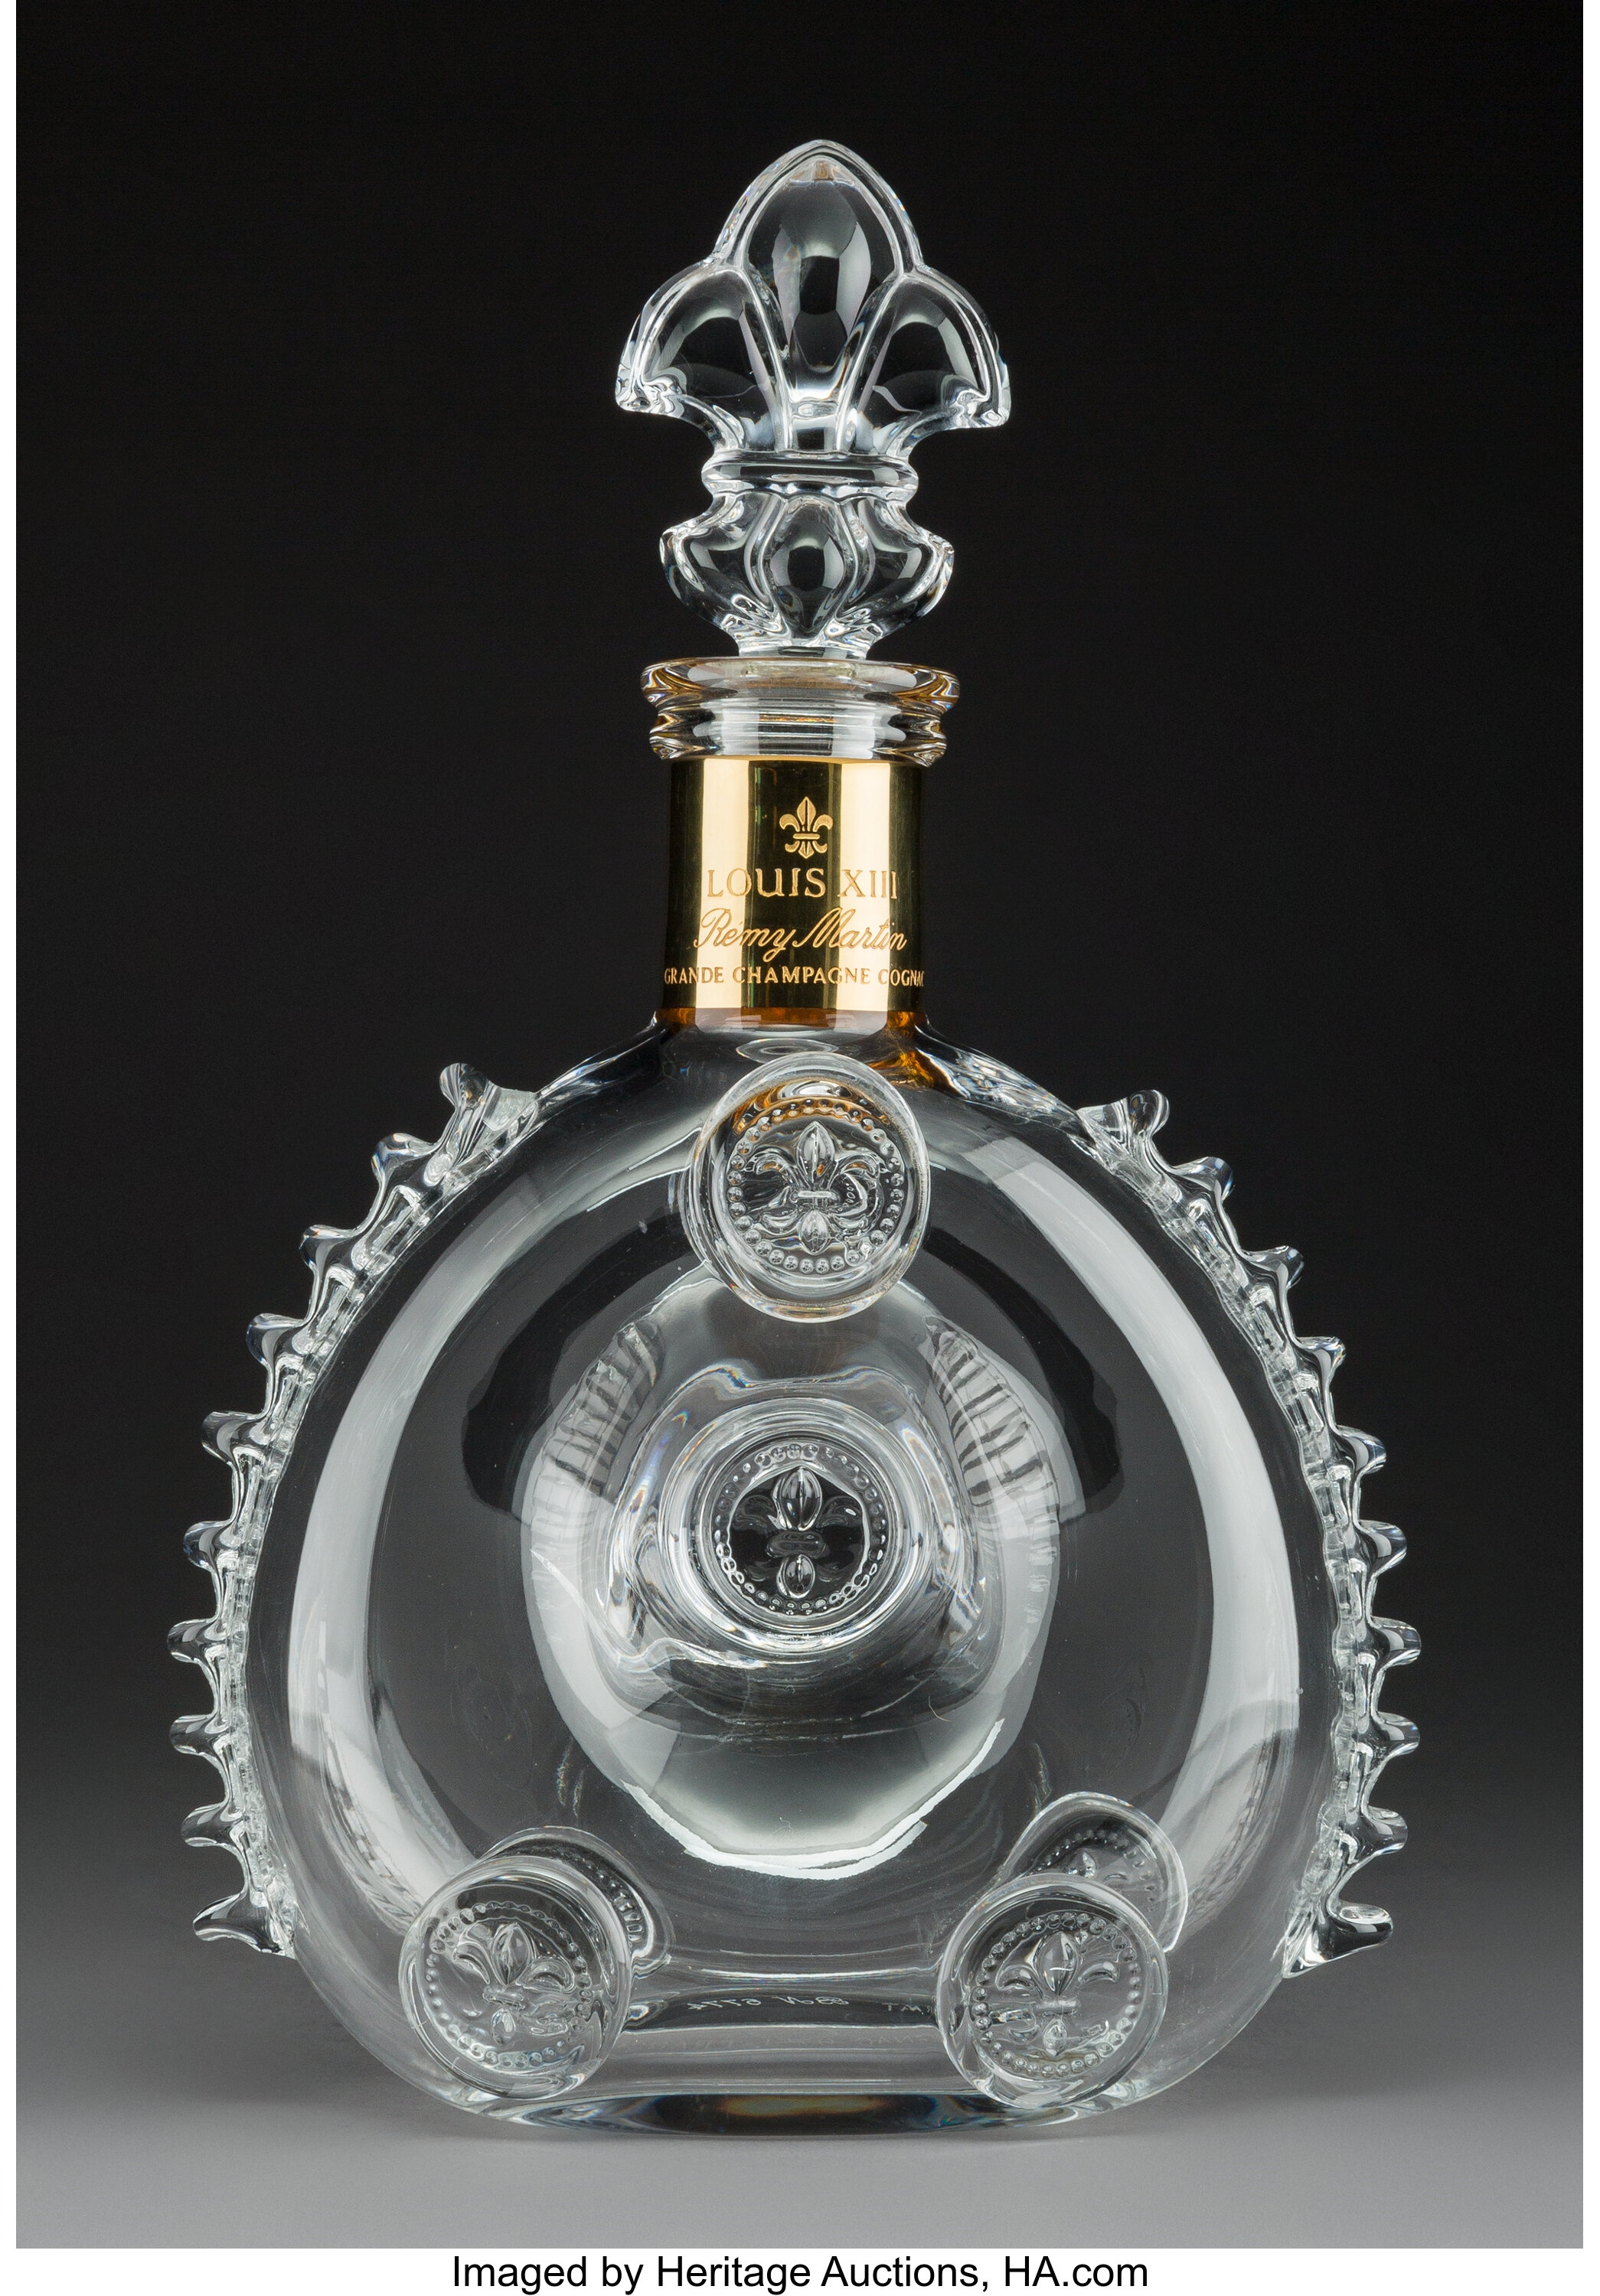 Remy Martin Louis XIII Cognac - Baccarat Crystal : The Whisky Exchange